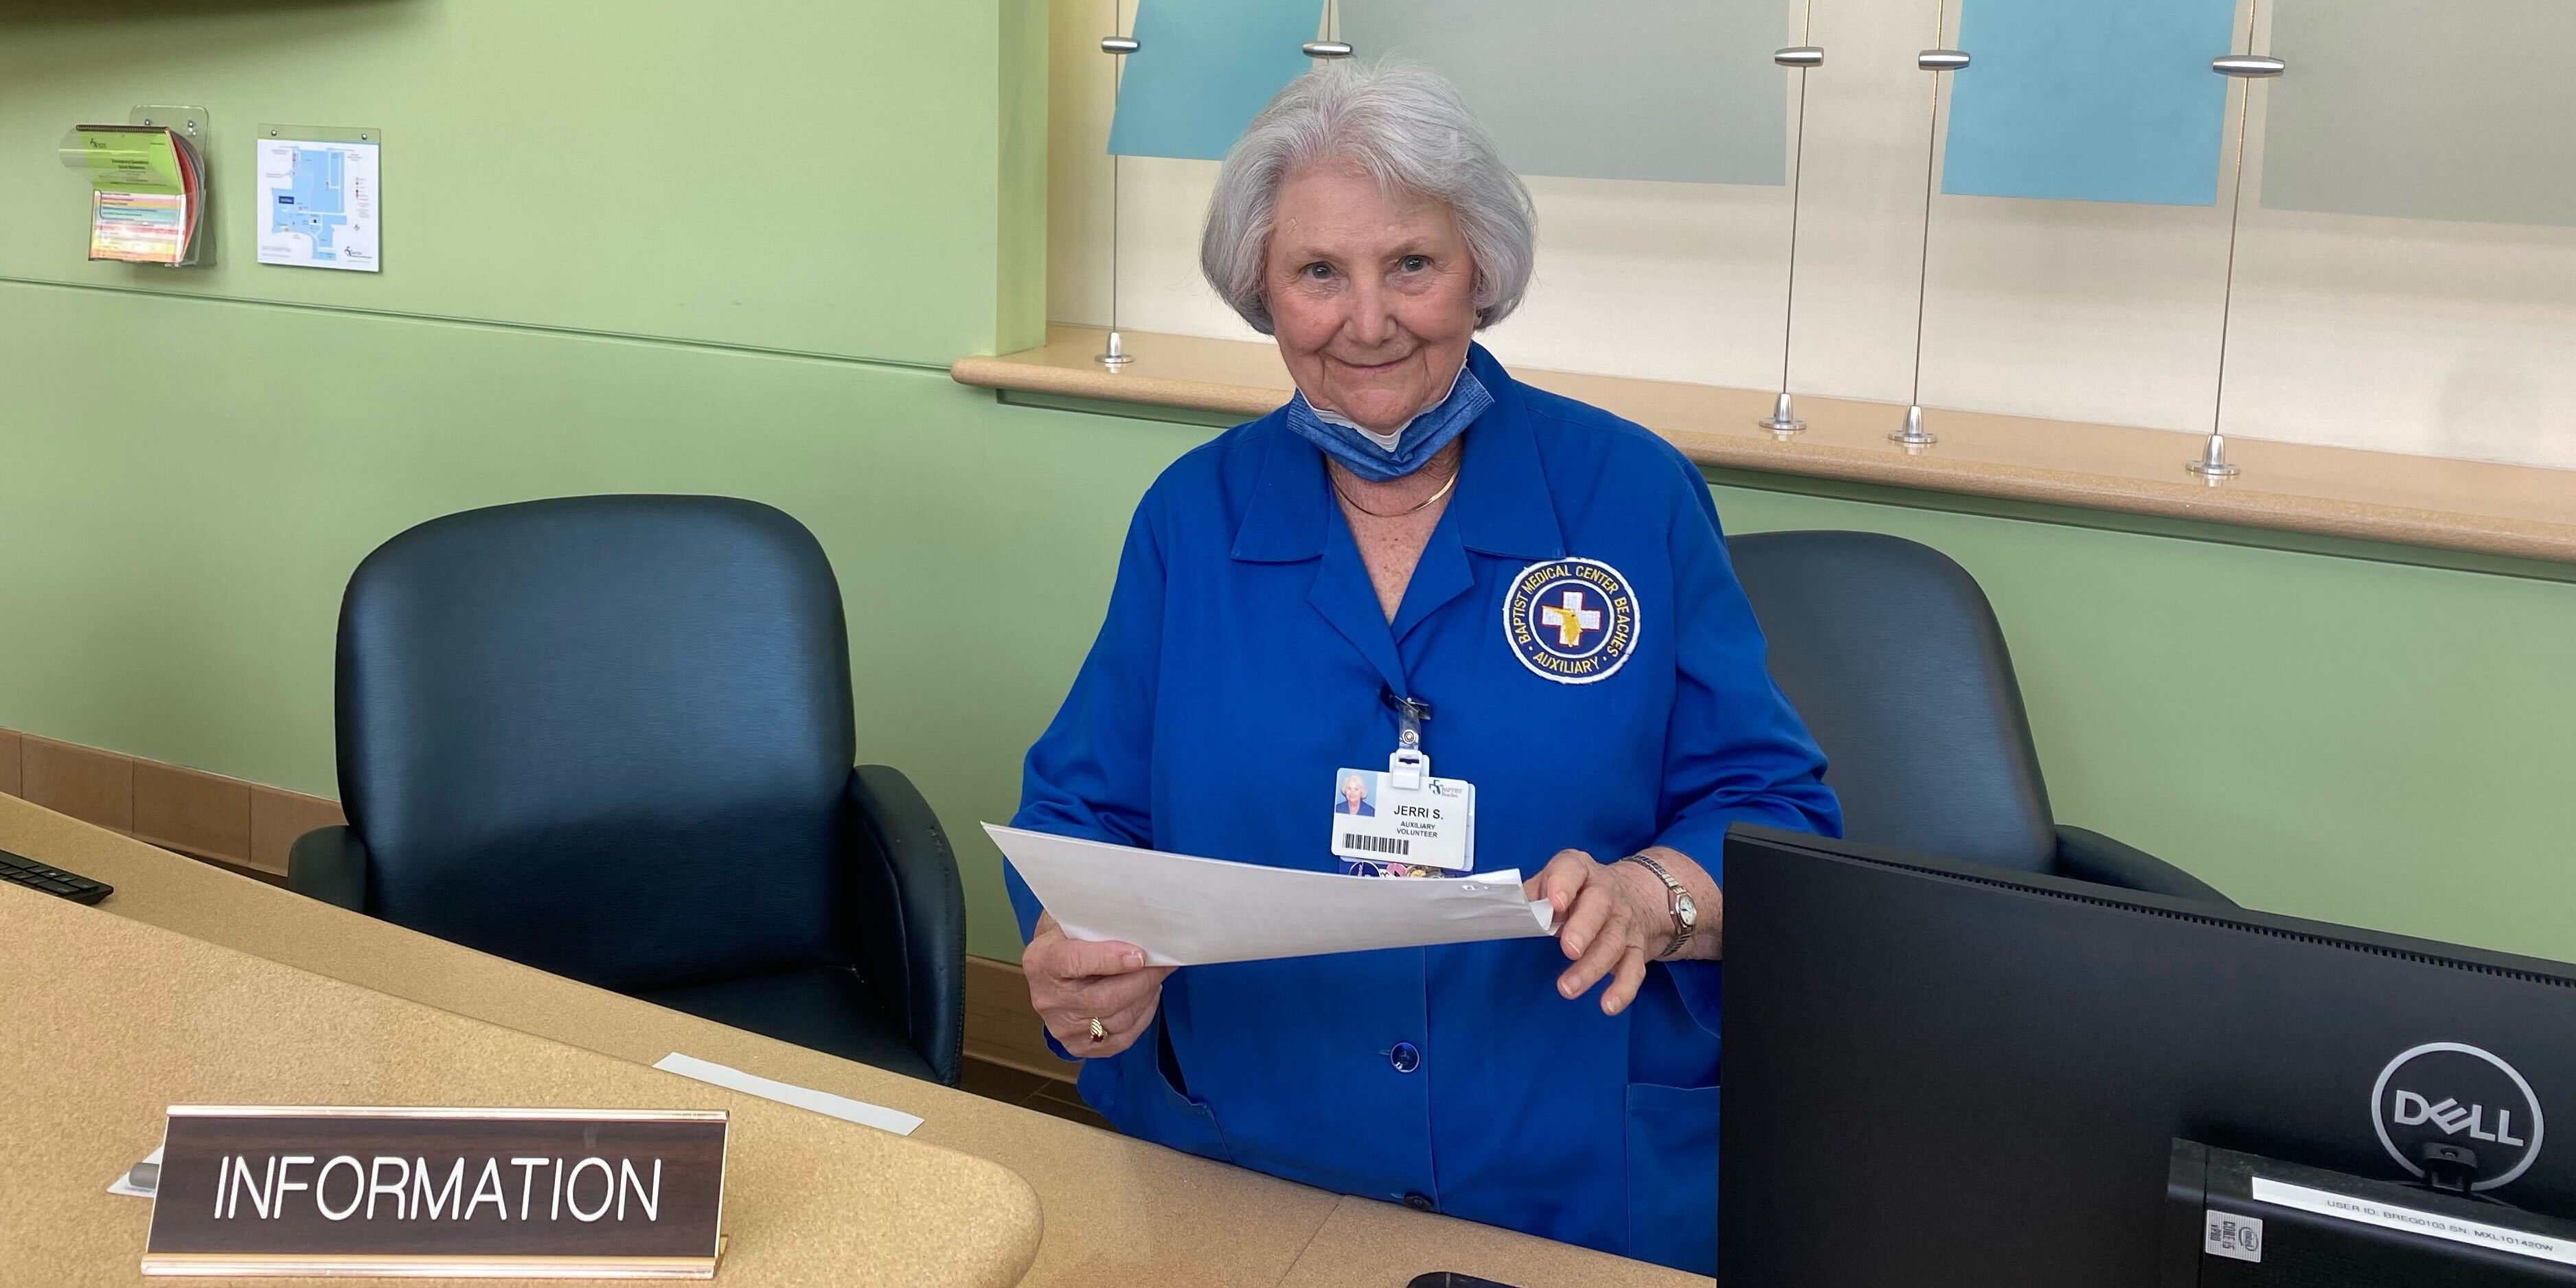 91 year old woman, Jerri Snavley, sitting behind an information desk at a hospital and smiling